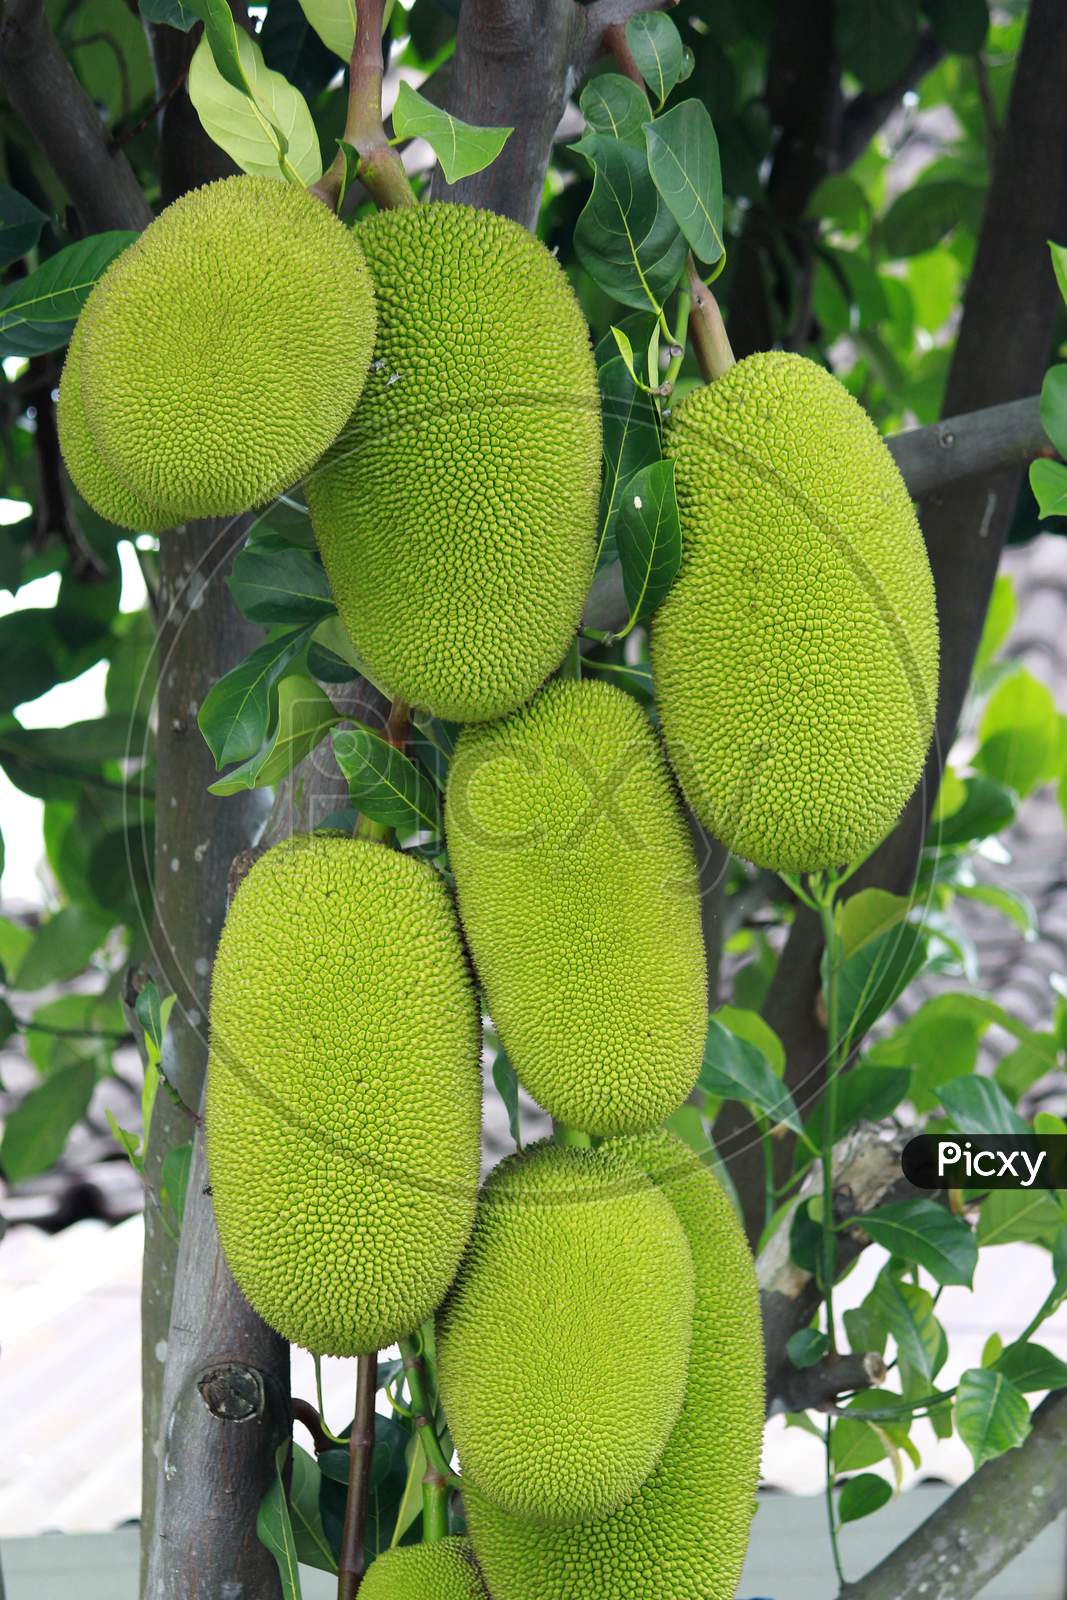 Young jackfruit tree with many fruit hanging